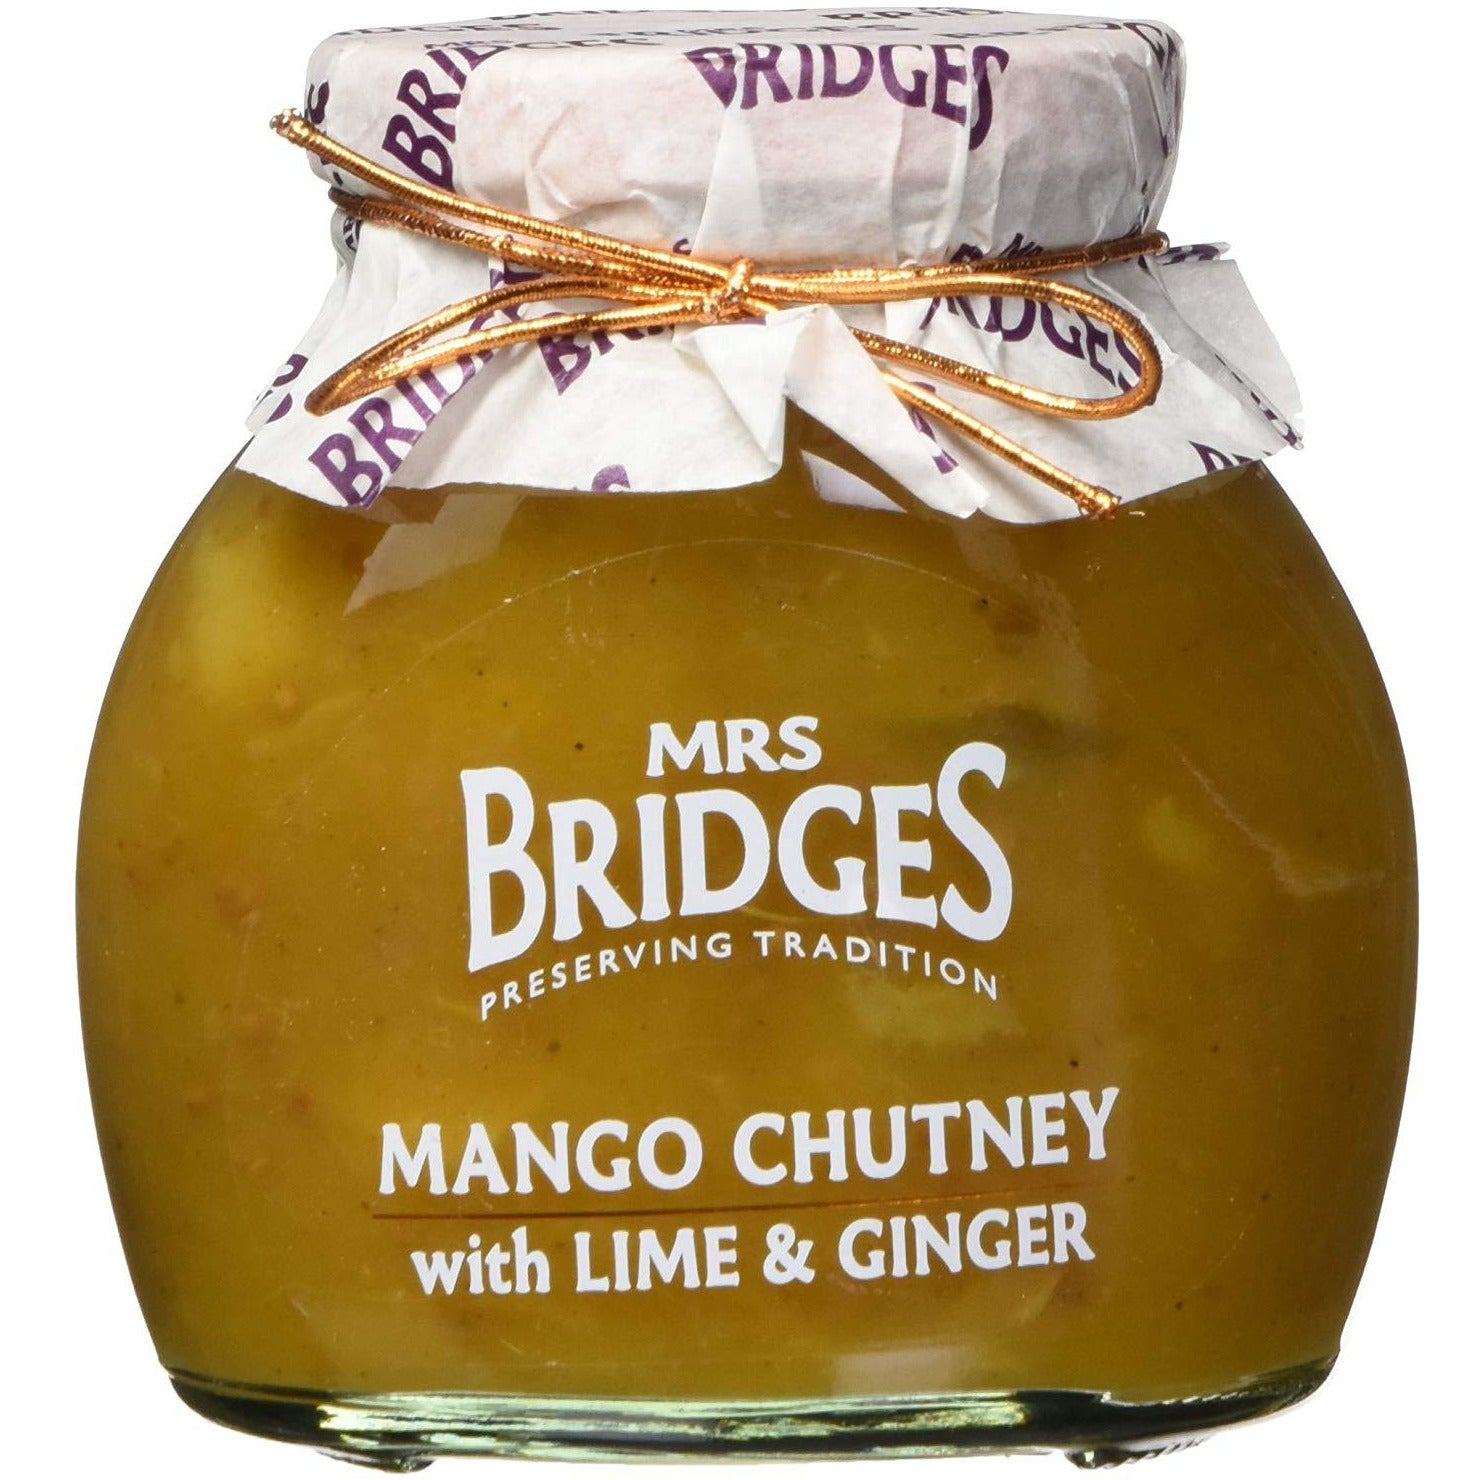 Mango Chutney with Lime and Ginger | Mrs Bridges – The Scottish Grocer